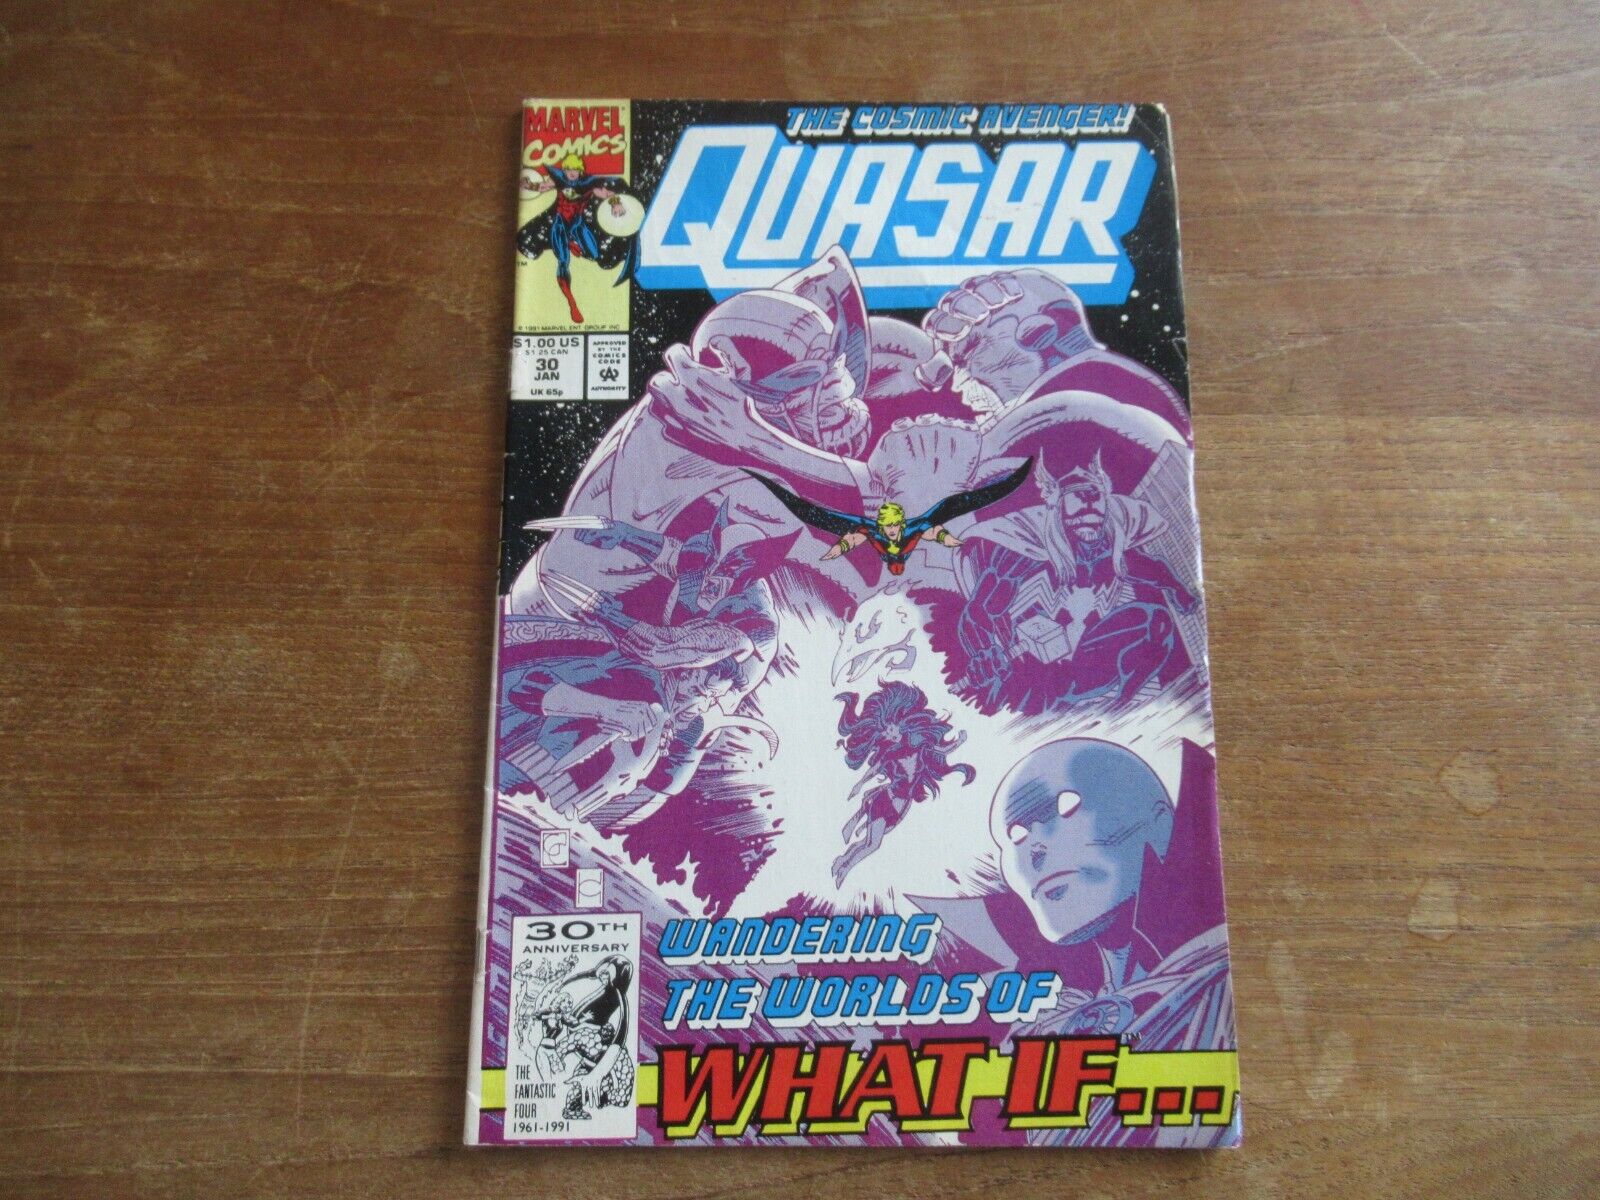 QUASAR #30 KEY ISSUE 1ST VENOMIZED CHARACTER THOR SWEET THANOS COVER